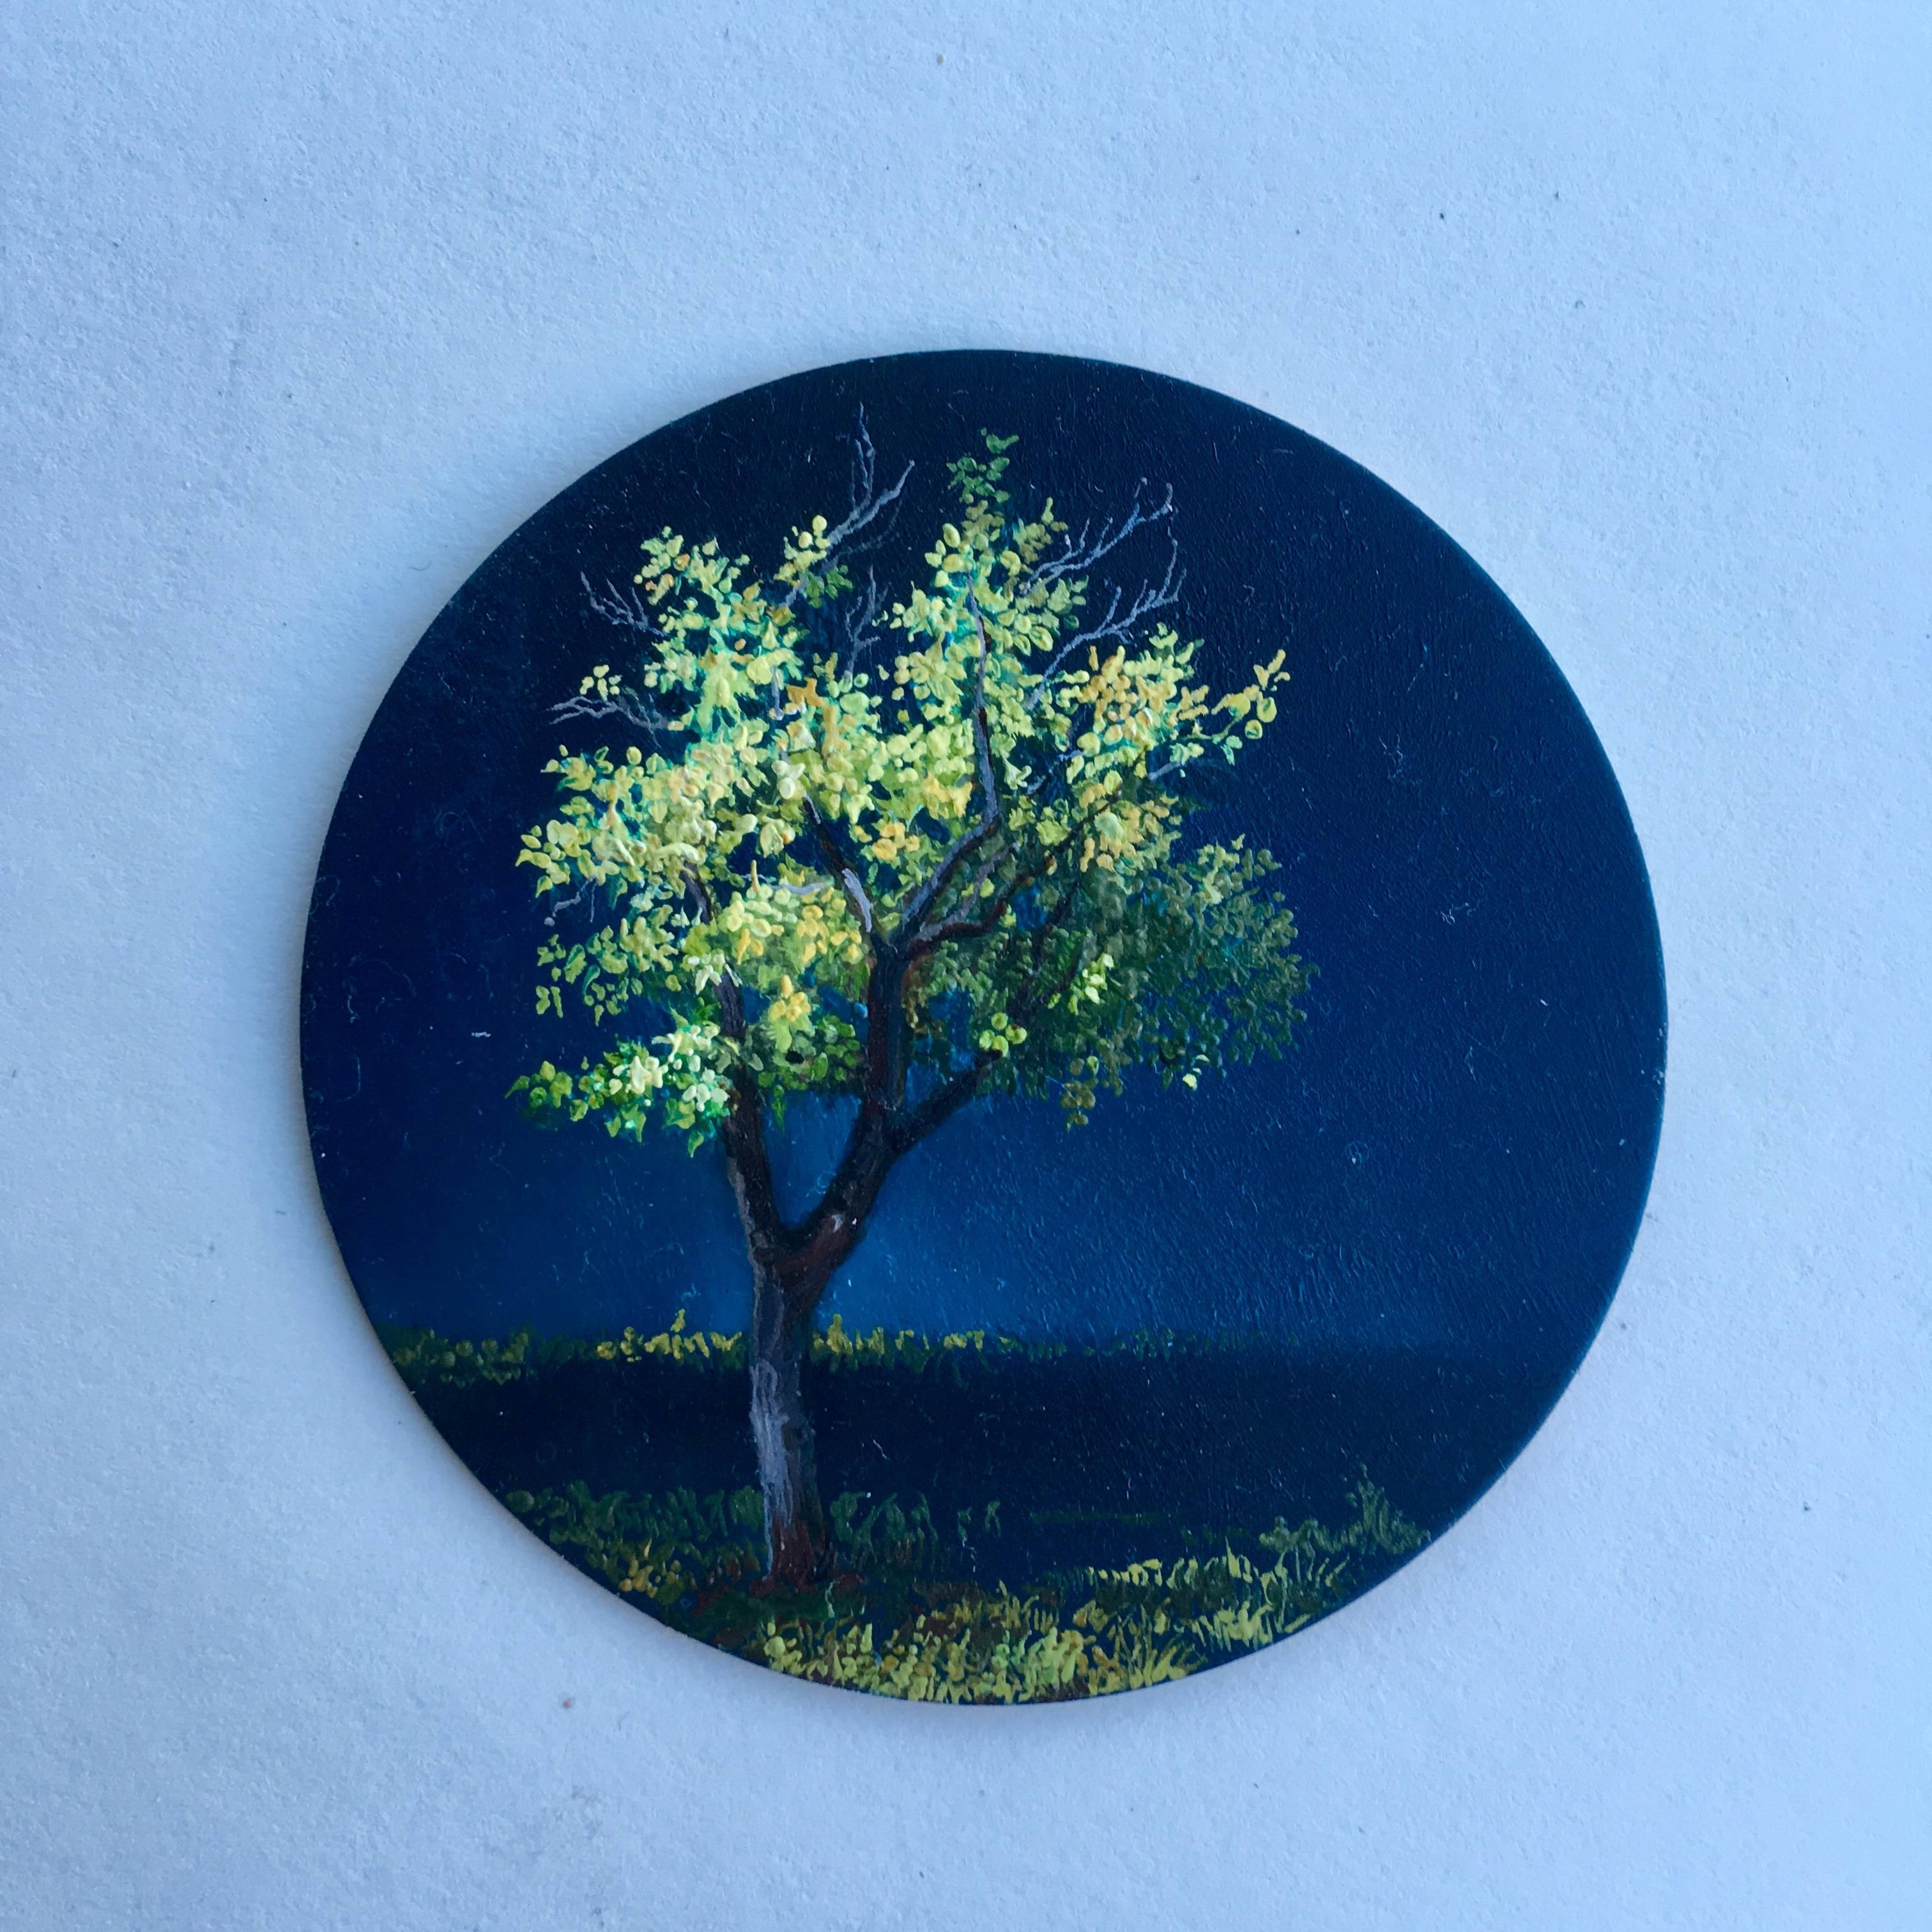 In her realist miniature tondo, "Tree, Mid-Spring," Dina Brodsky uses oil paint on copper to depict the pale, fledgling foliage in uncompromising detail. Brodsky's greens and yellows are particularly poignant against their deep blue ground. The